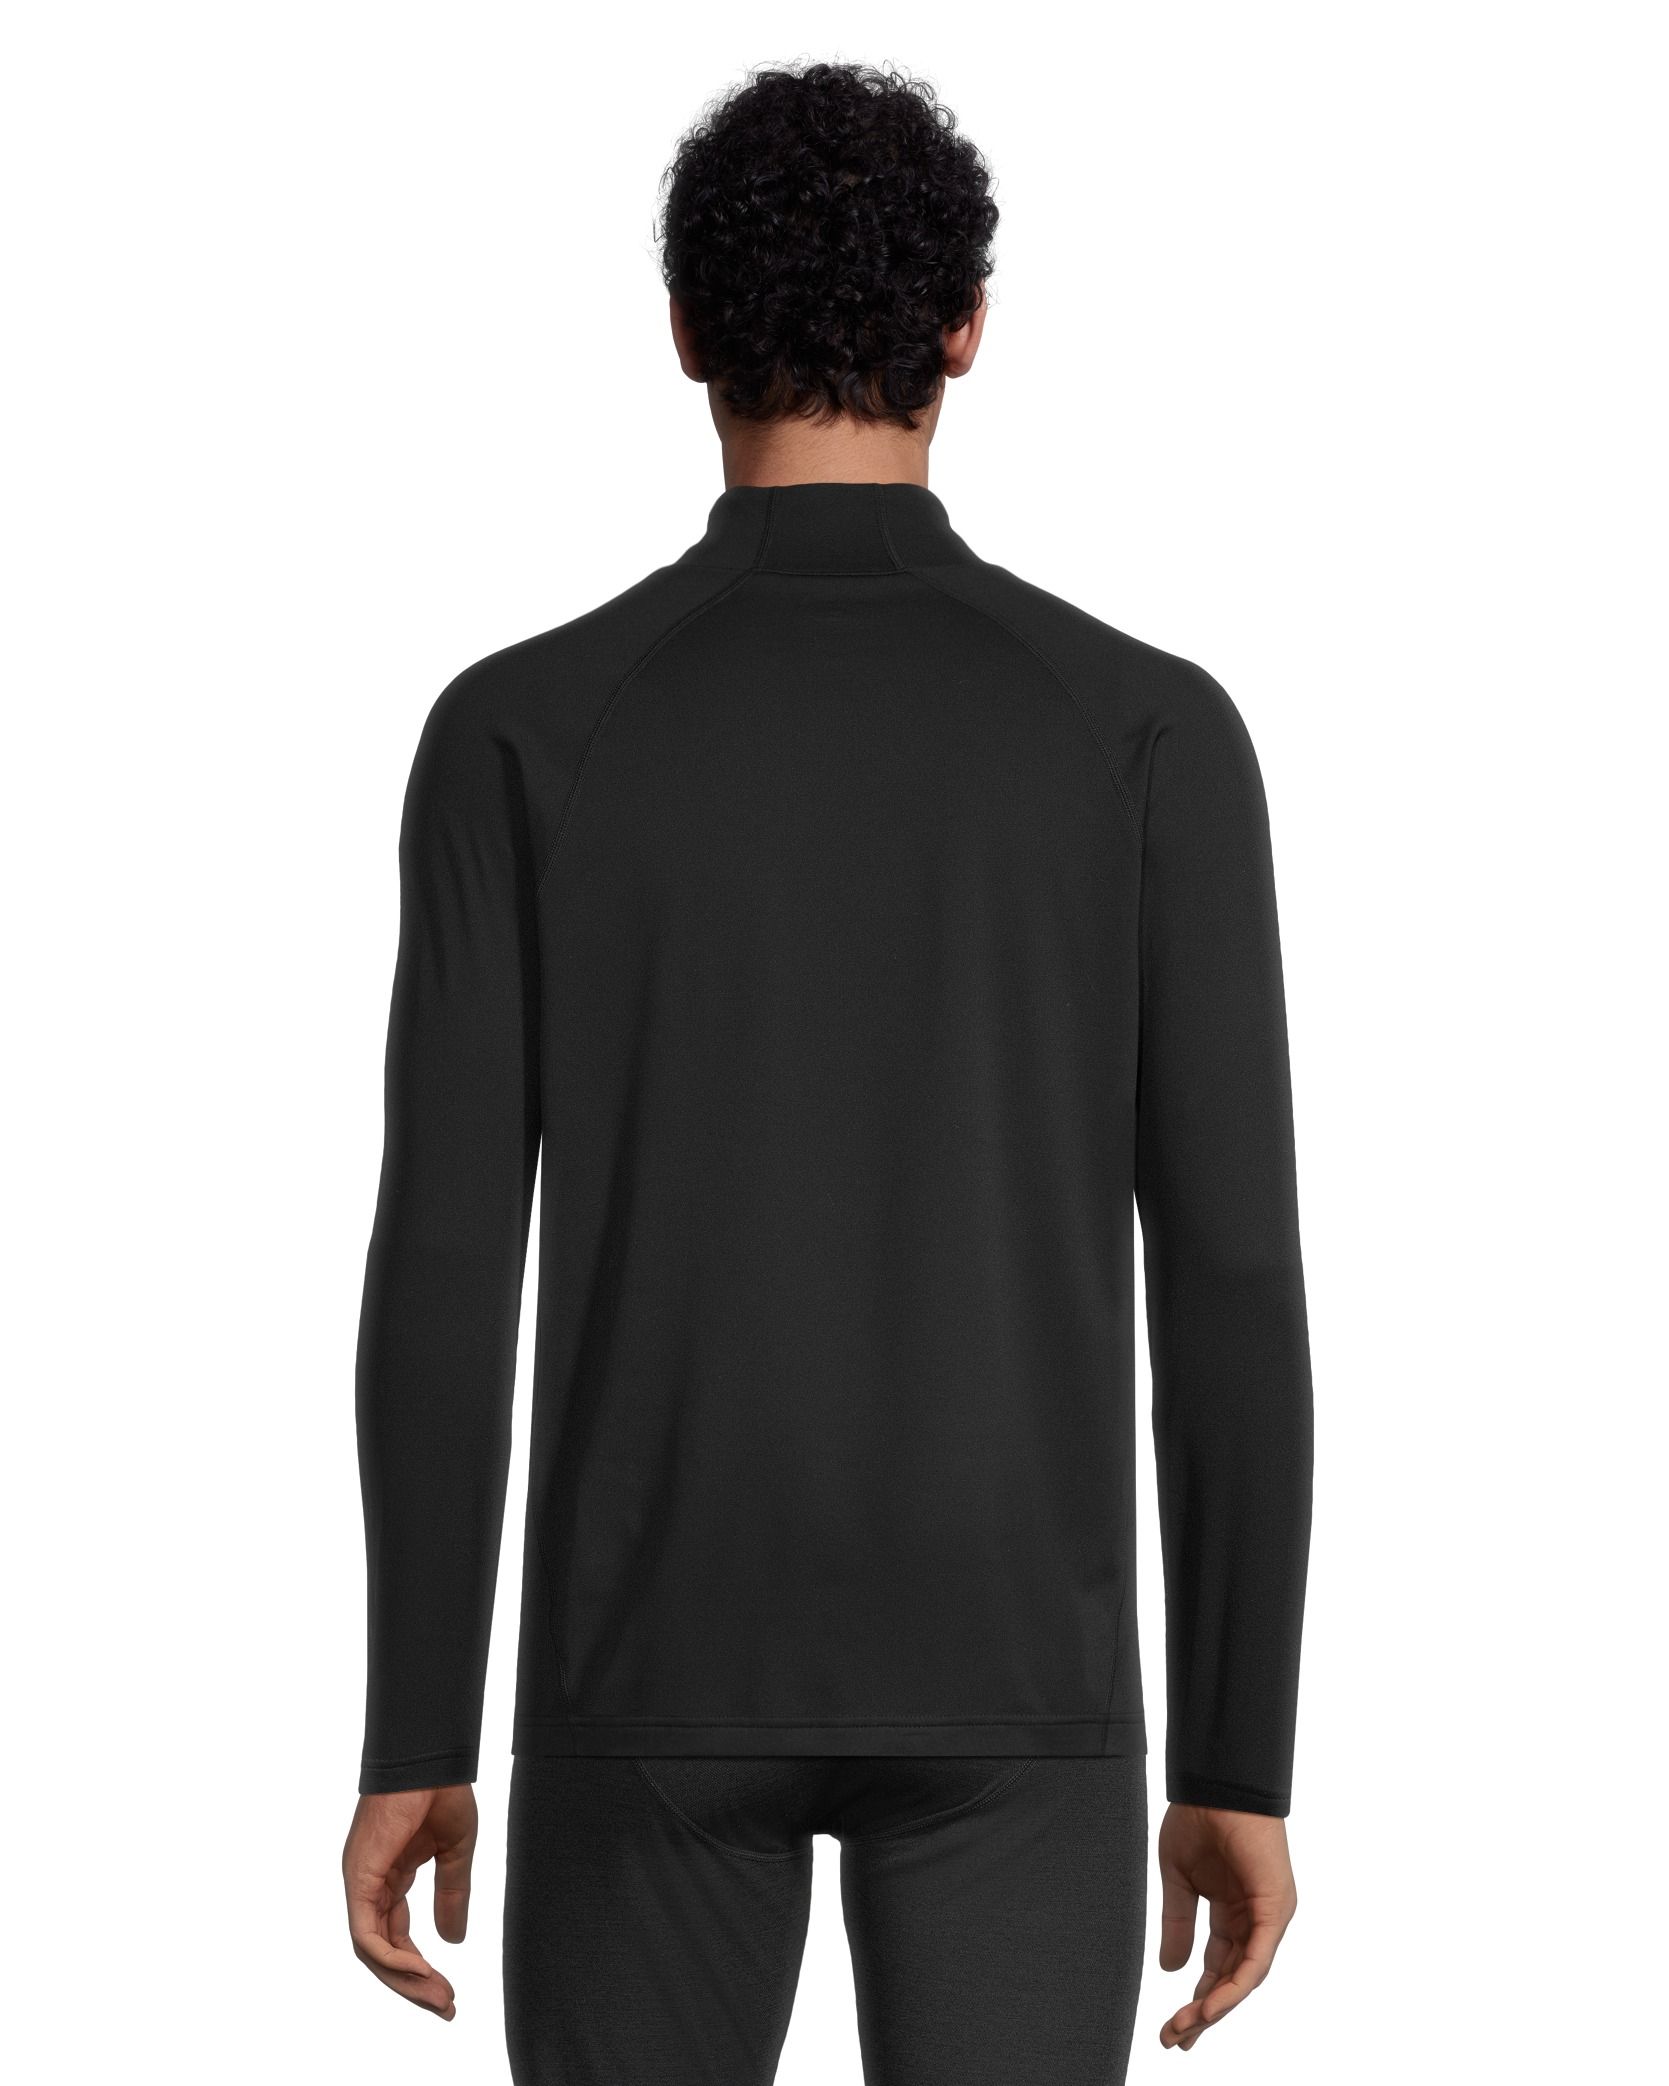 WindRiver Men's Thermal Stretch Freshtech Long Sleeve Waffle Top - Black